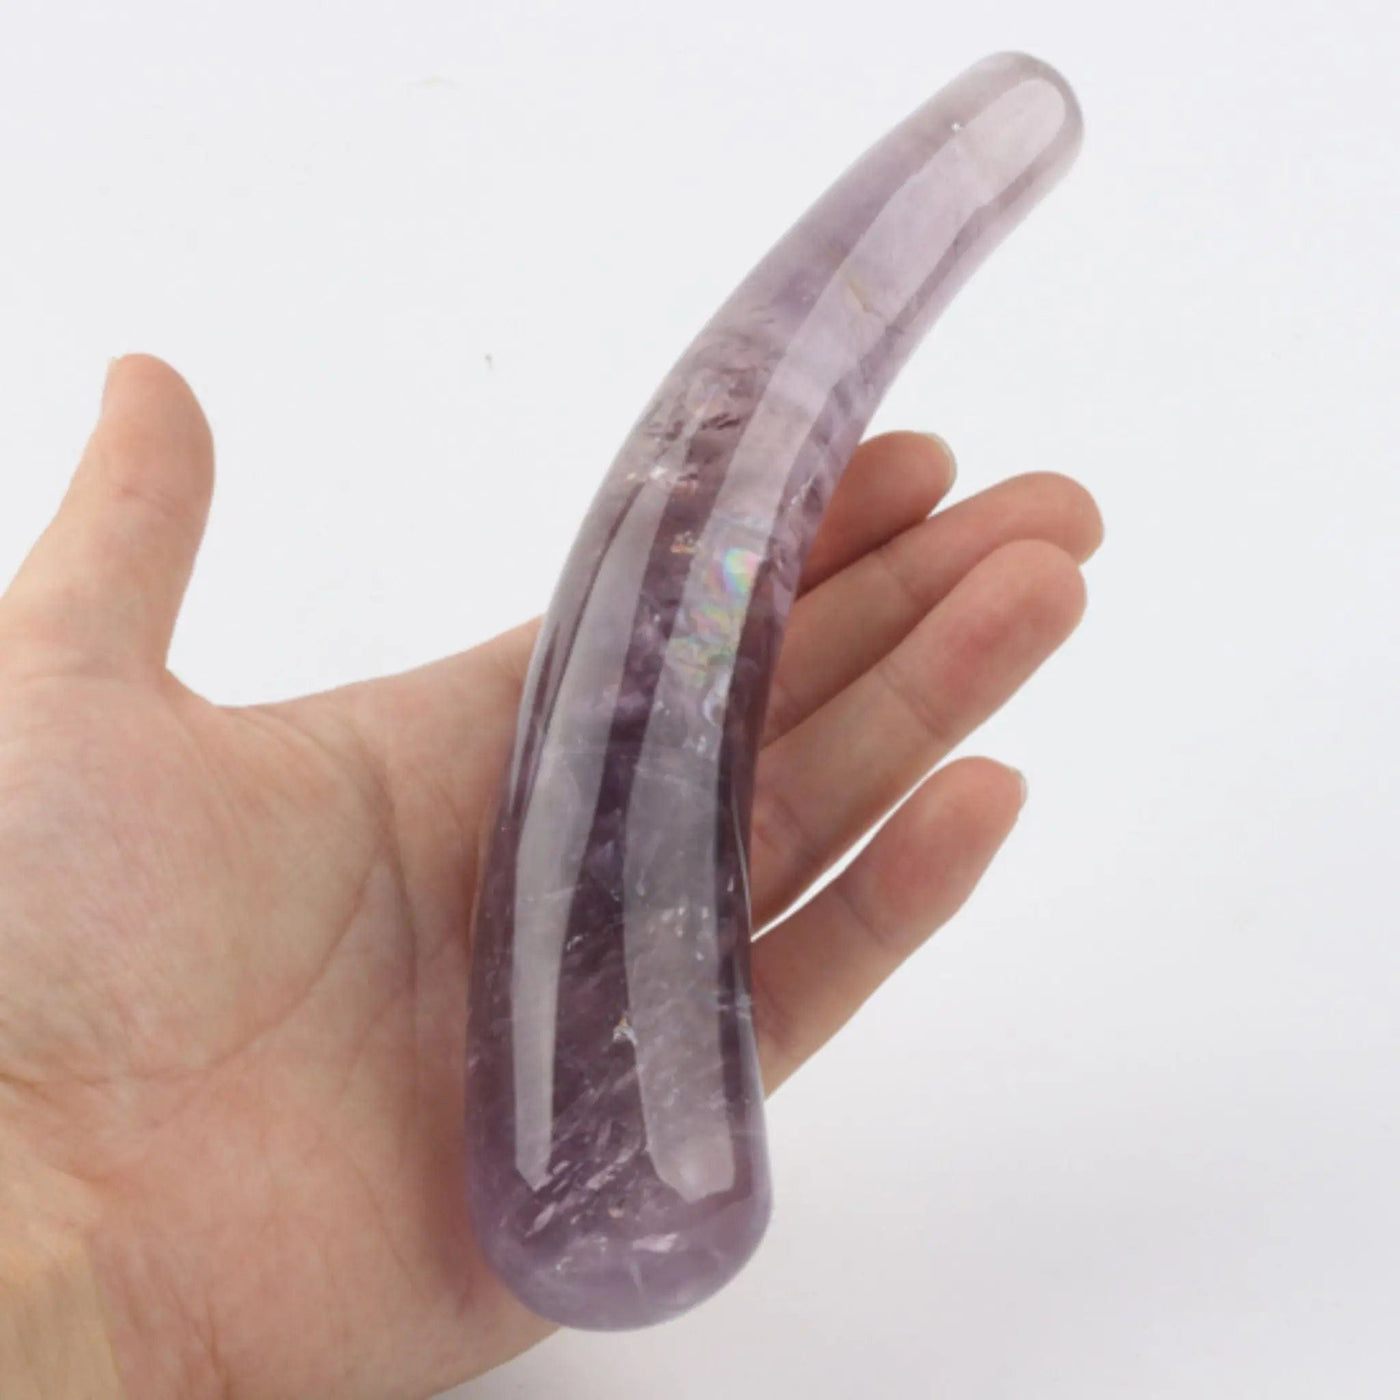 Daphne Amethyst Wand - Wands of Lust Co